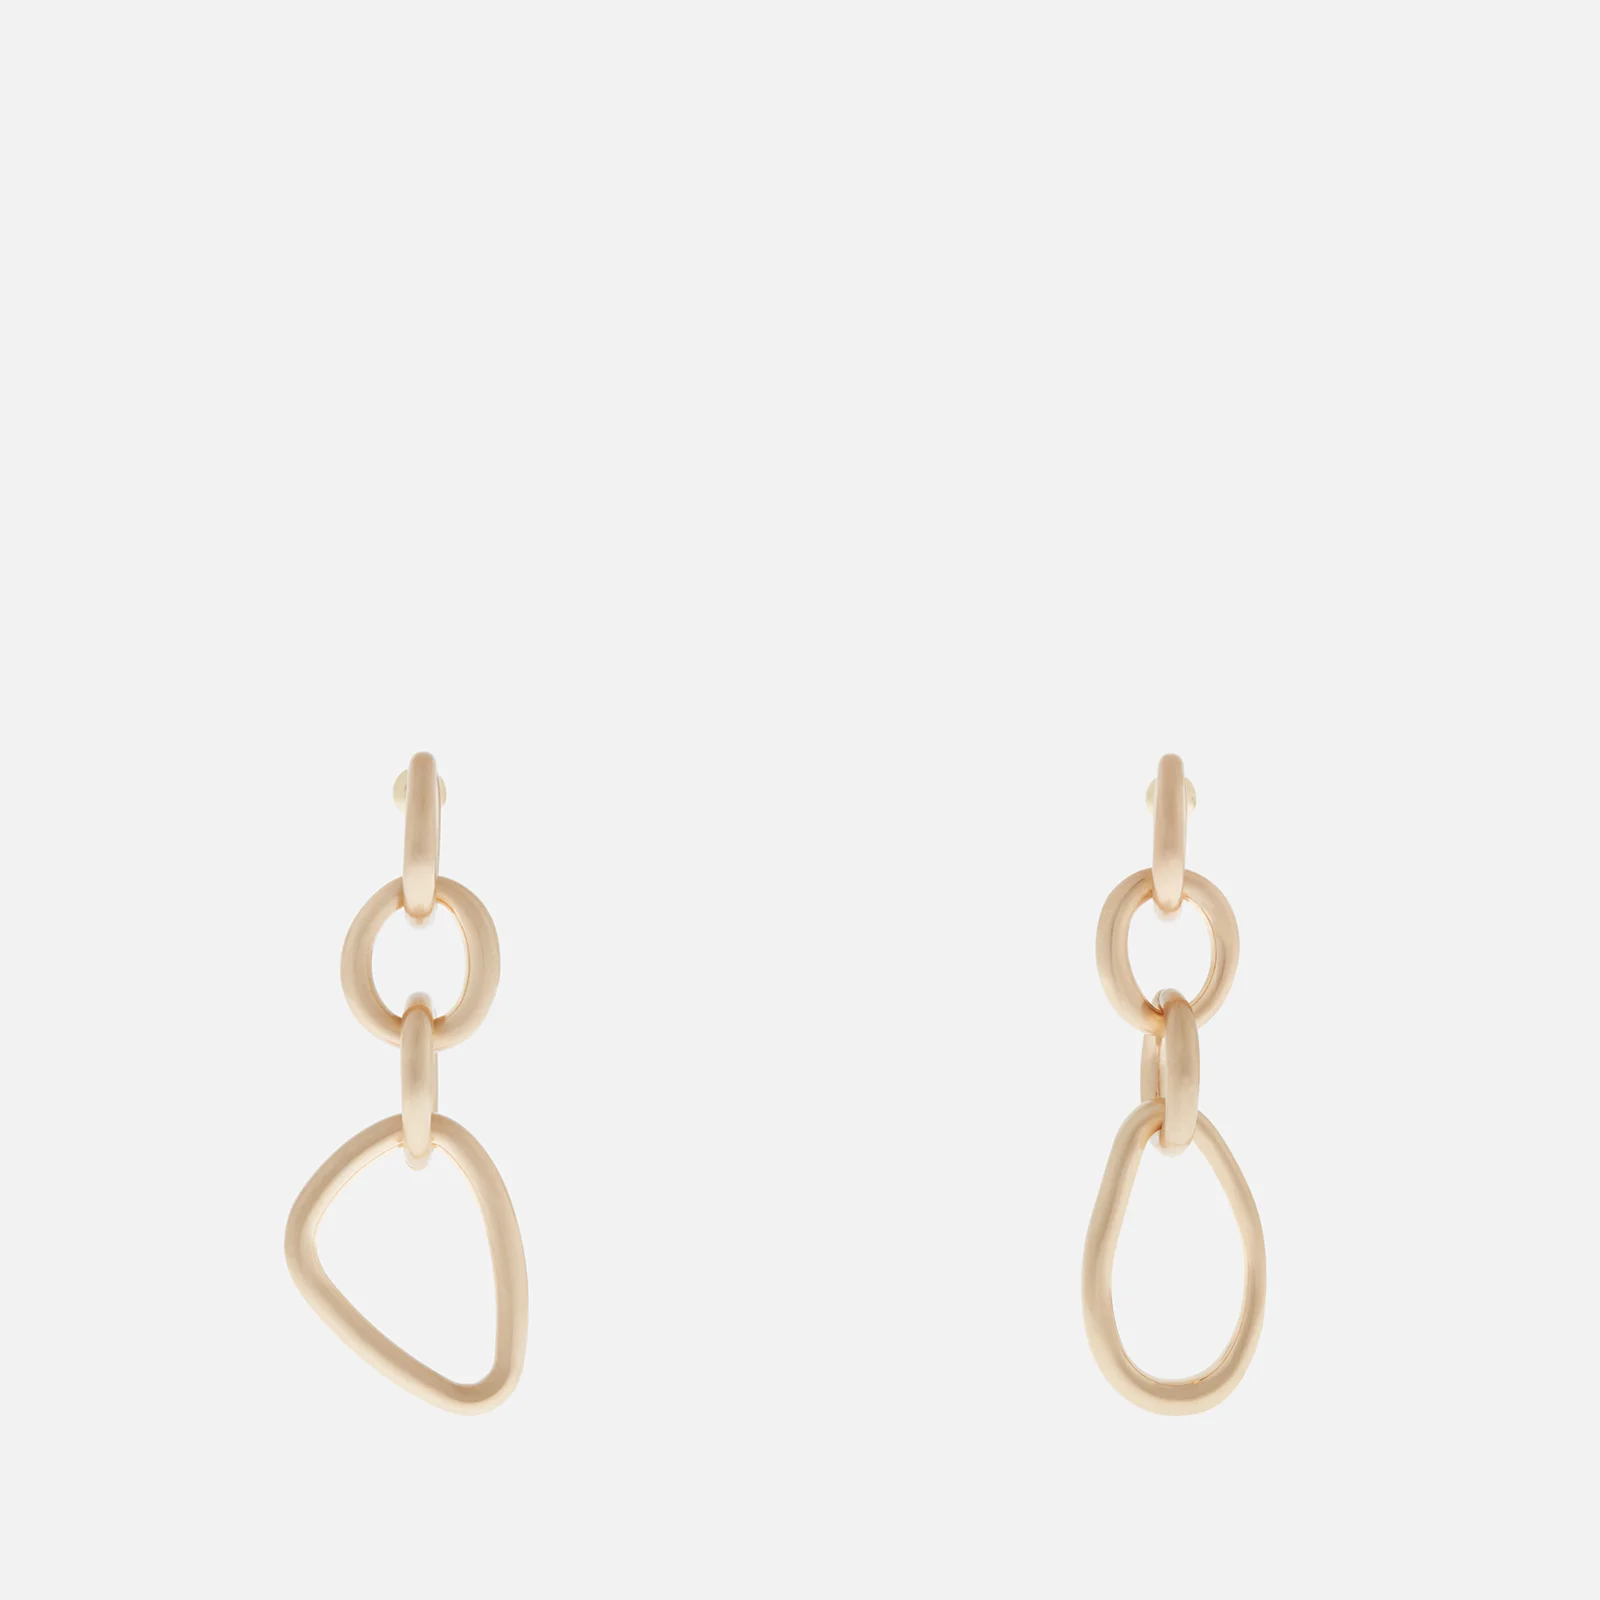 Cult Gaia Reyes Brushed Gold-Tone Earrings Image 1